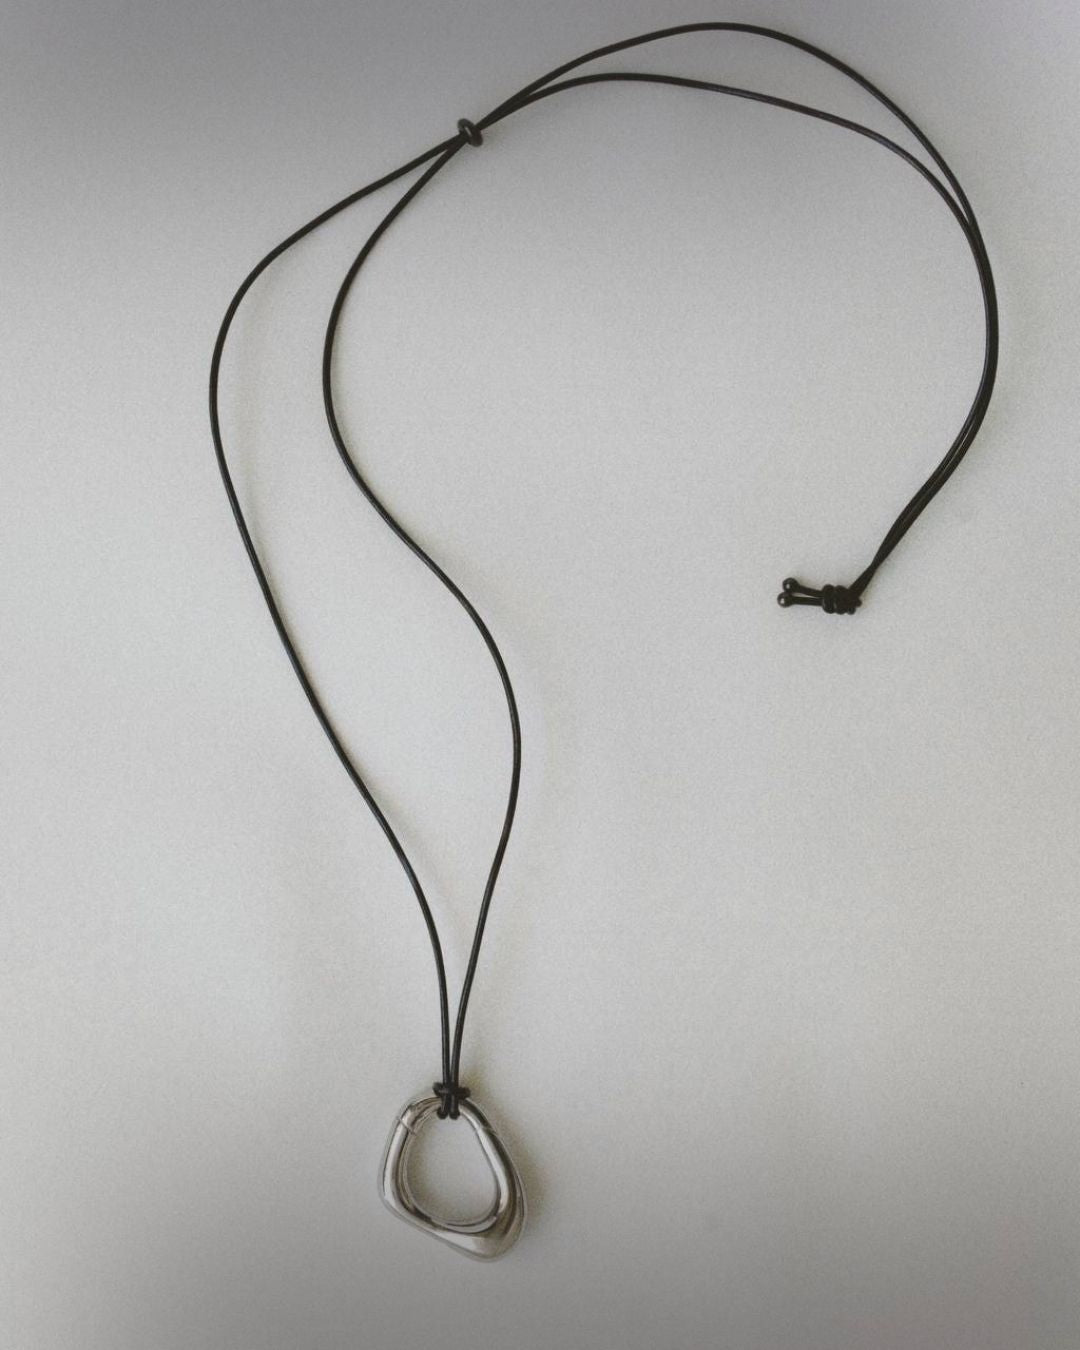 Momentum Necklace by Enso Design Lab, featuring a unique, fluid-inspired pendant in silver color. The necklace is laid flat with the leather cord visible.